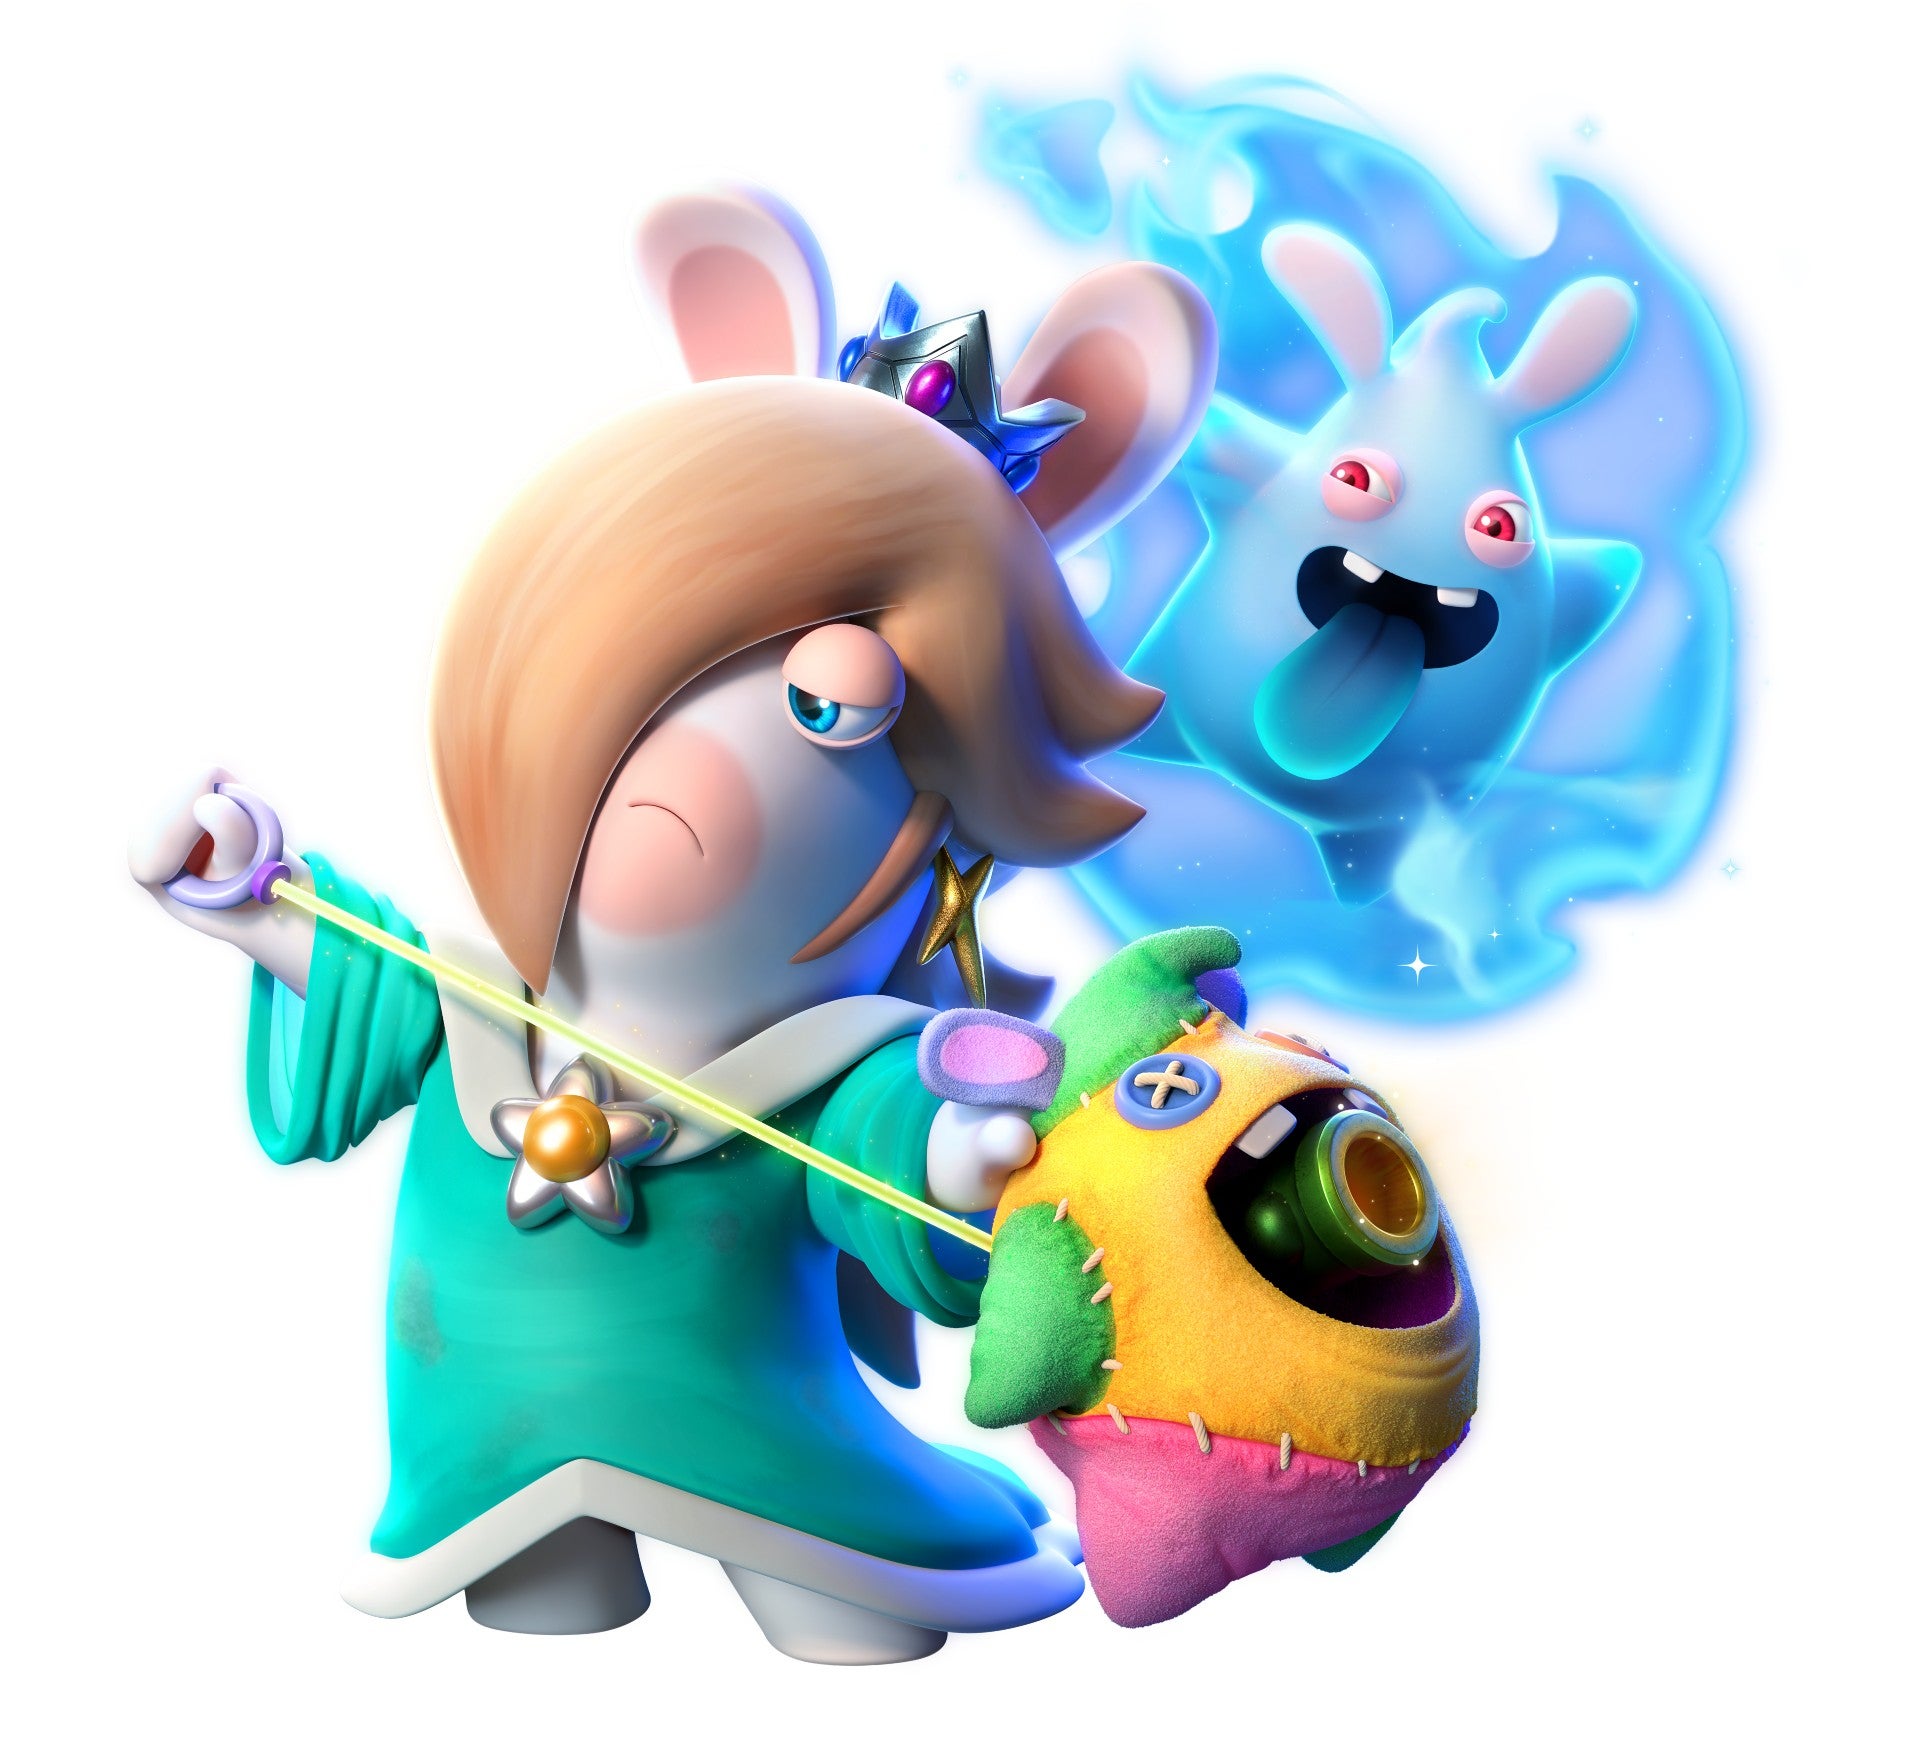 Rosalina and her spark in Mario + Rabbids Sparks of Hope.